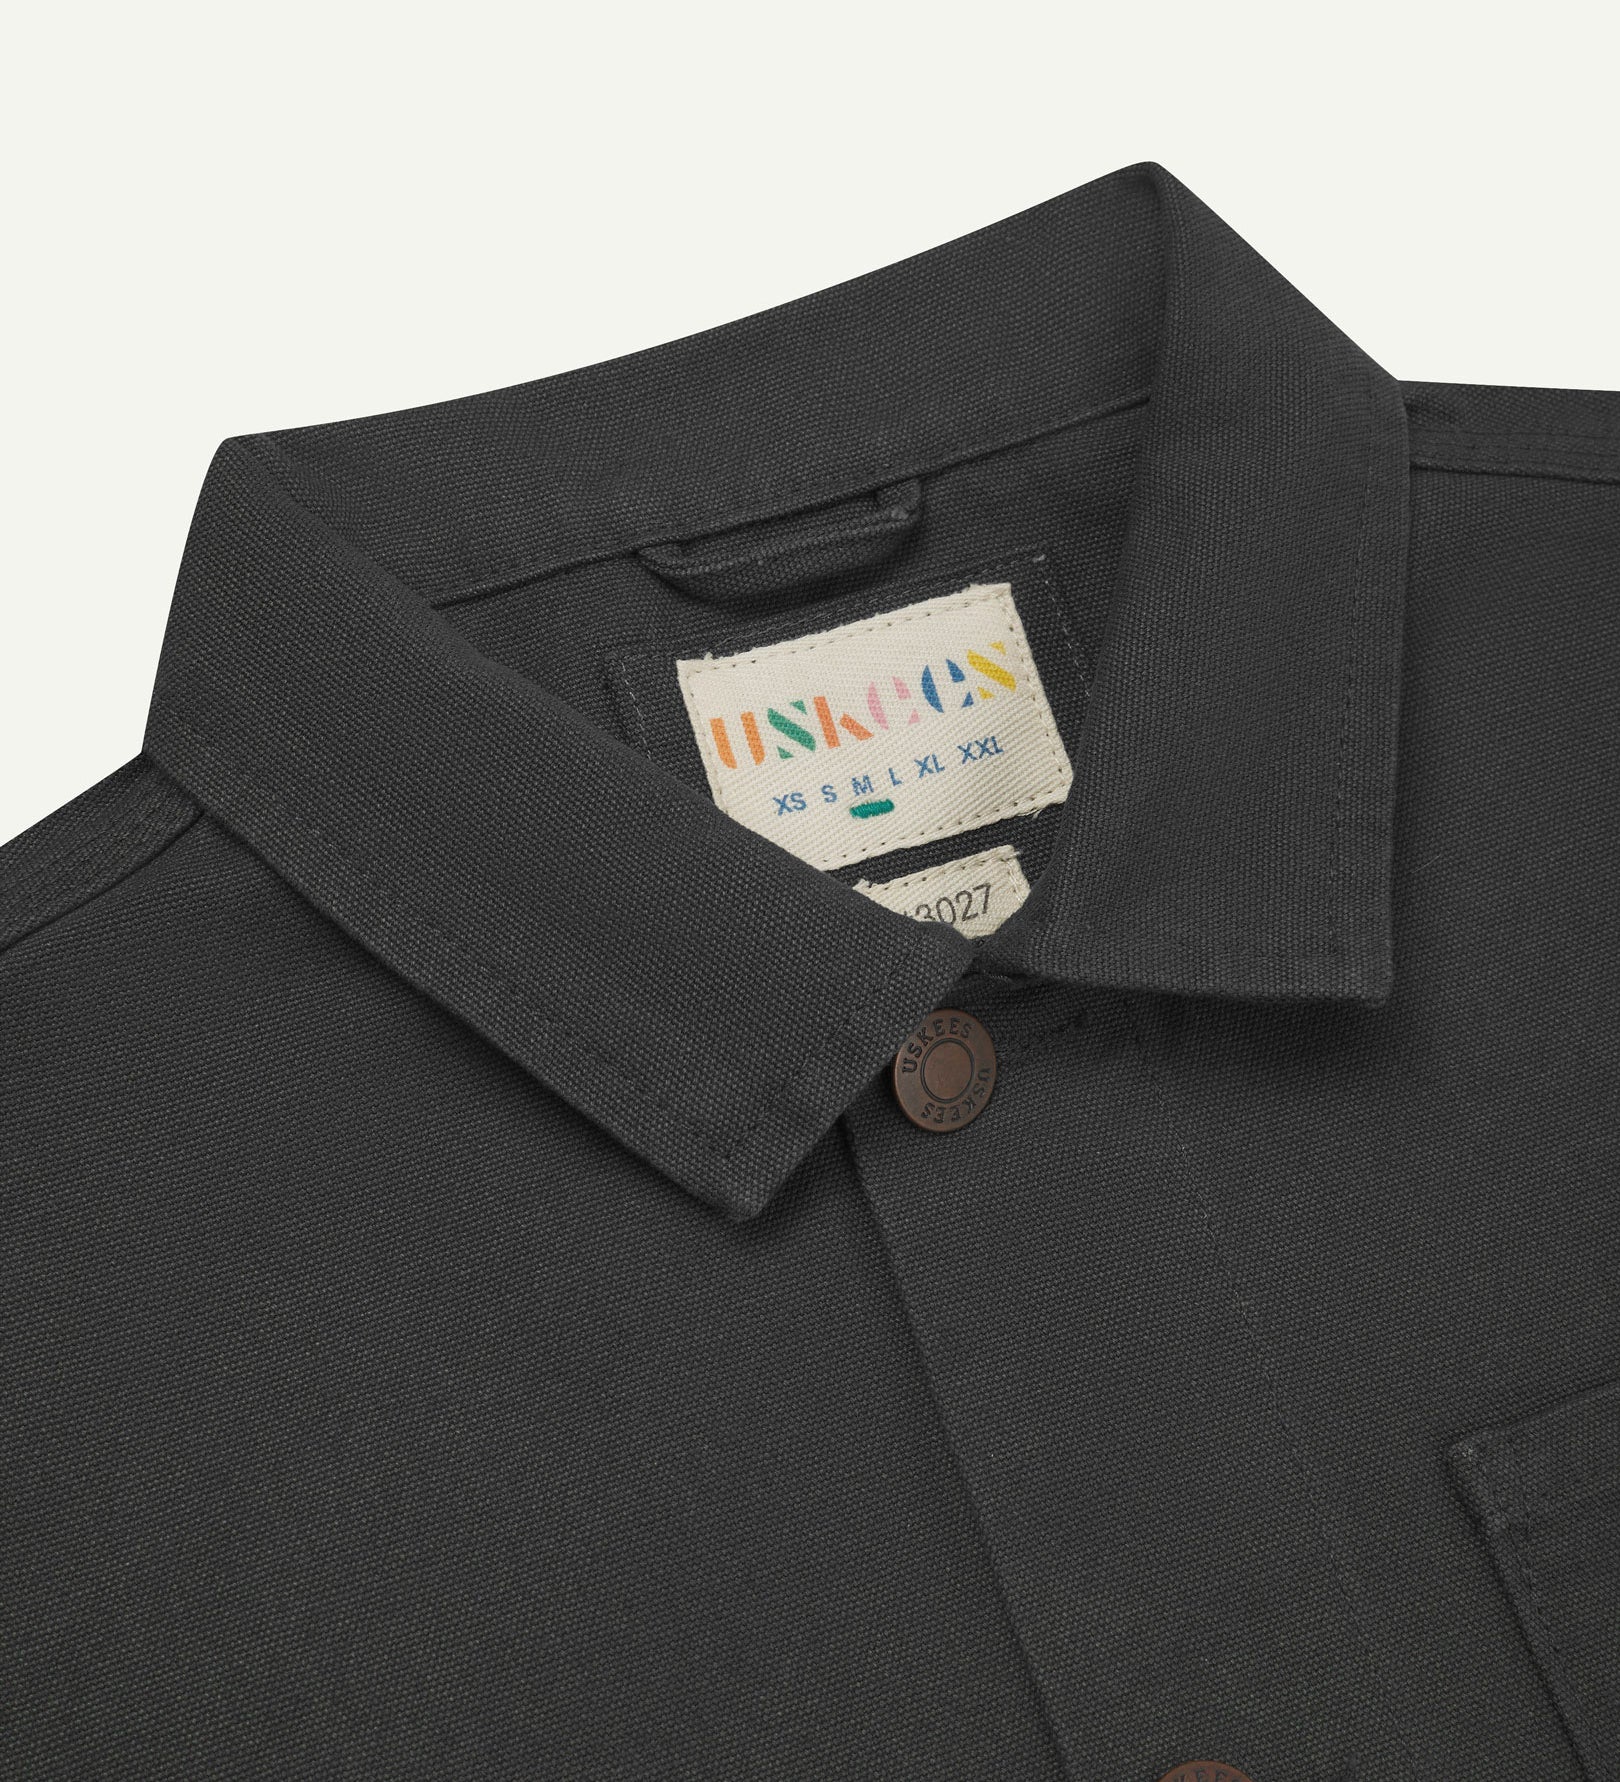 Front close-up view of Uskees dark grey canvas men's overshirt presented buttoned up showing the metal buttons, collar and brand label.